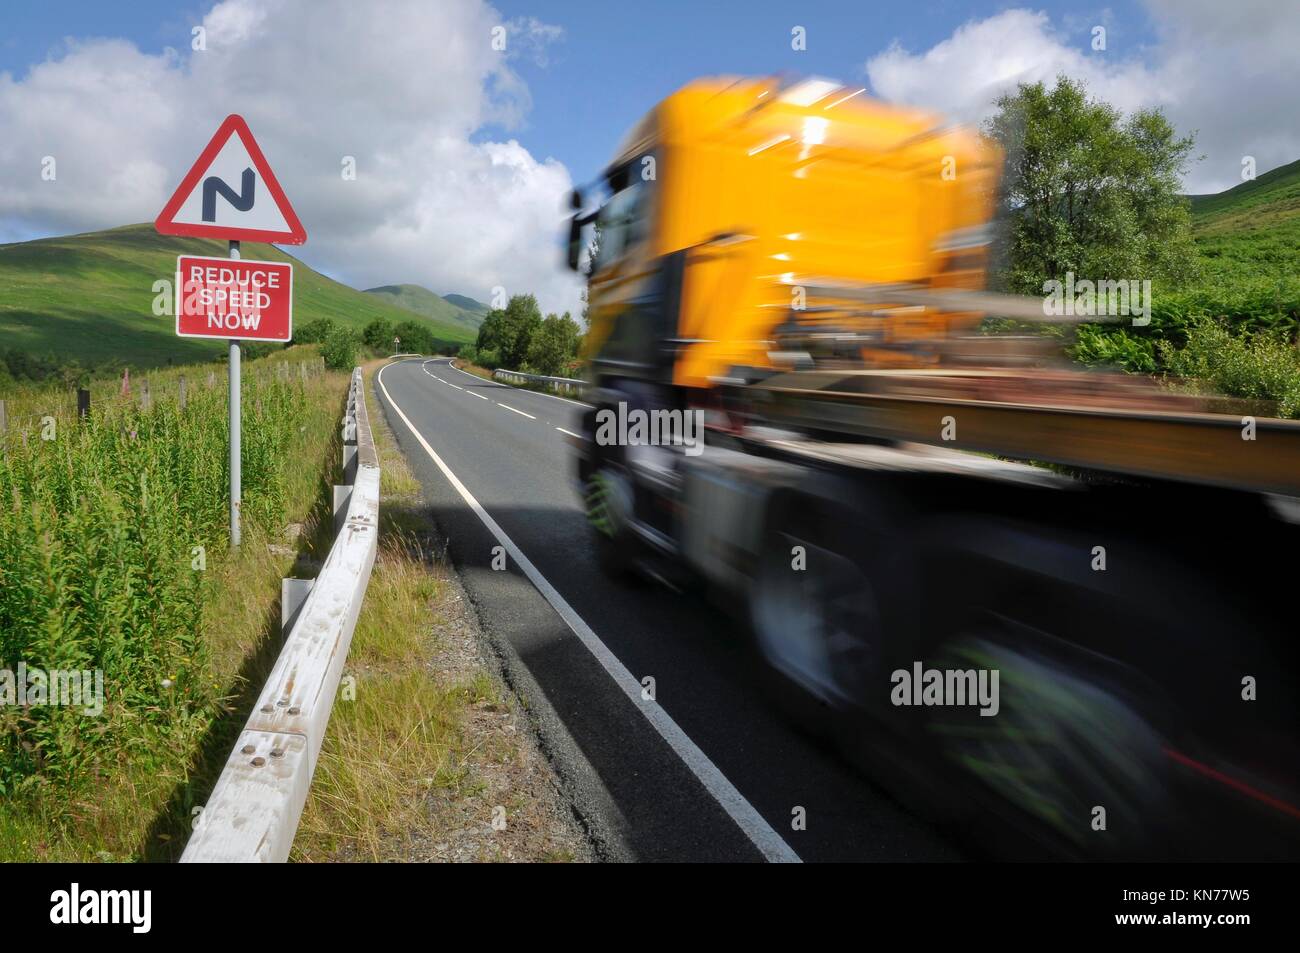 Truck on mountain road in Scotland. Road A817, Argyll & Bute, Scotland. Stock Photo